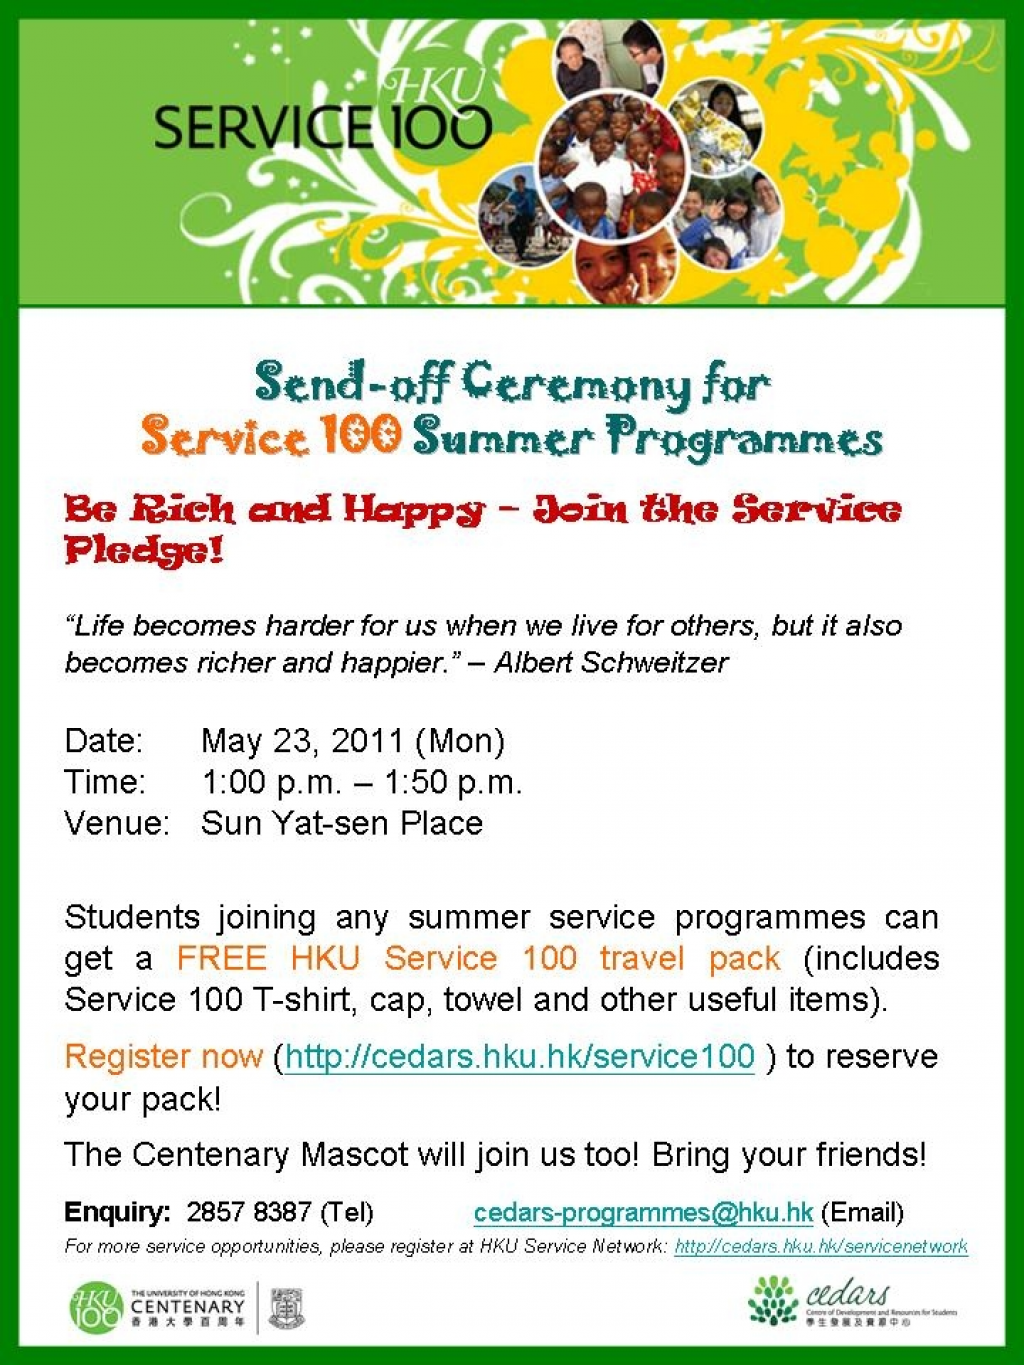 Send-off Ceremony ~ Party, mini service project exhibition, Centenary Mascot and more 